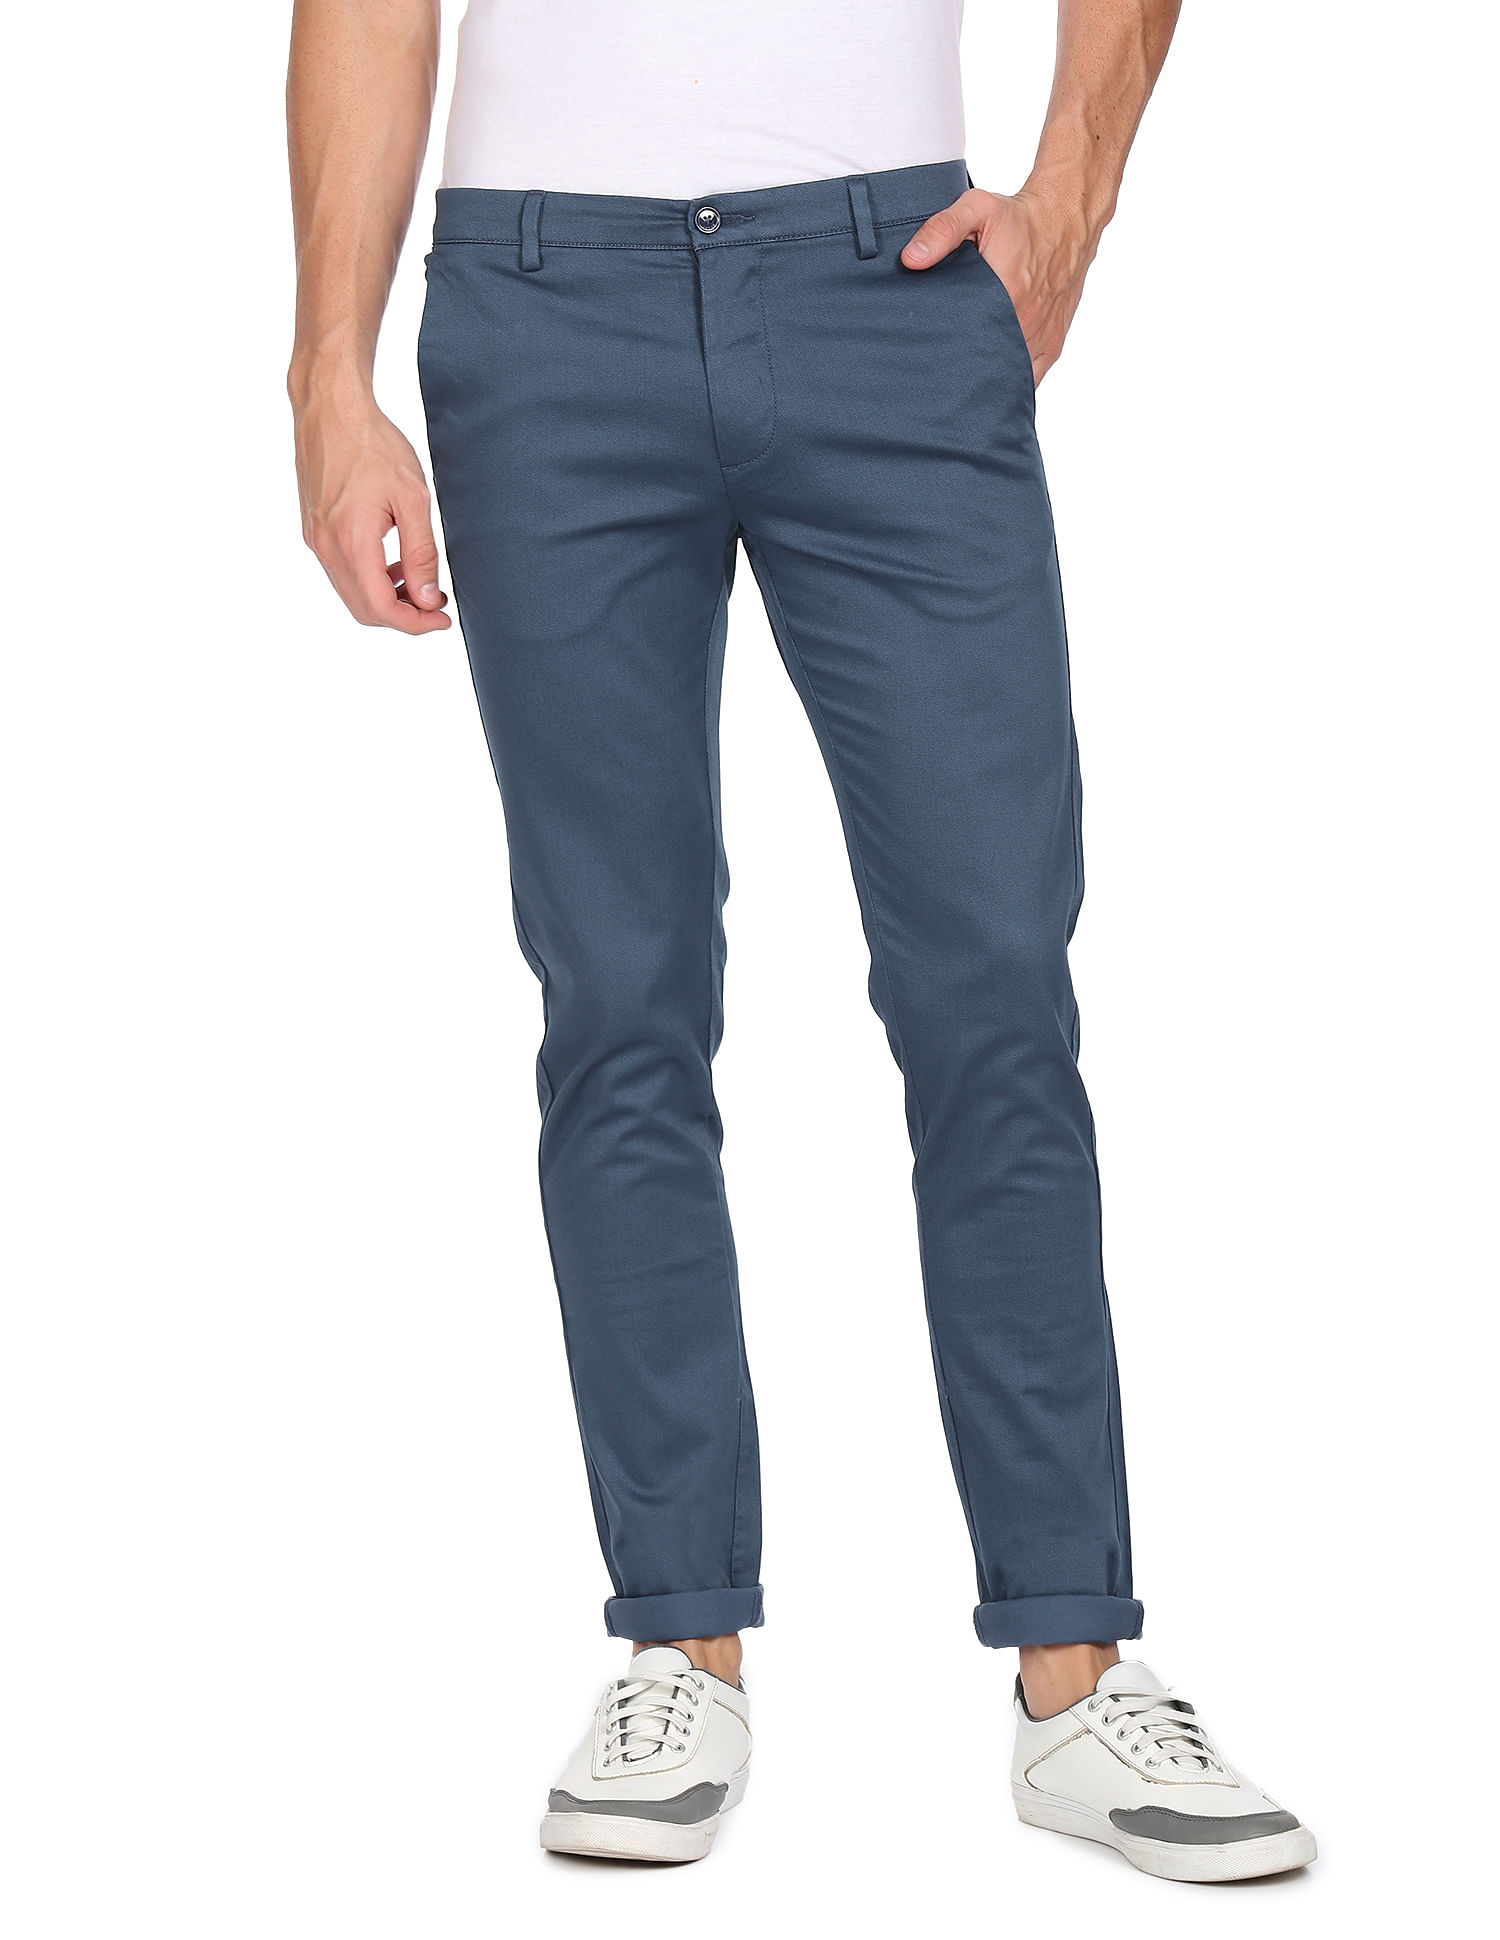 Dark Blue Slim Fit Lace Up Pants for Men by GentWithcom